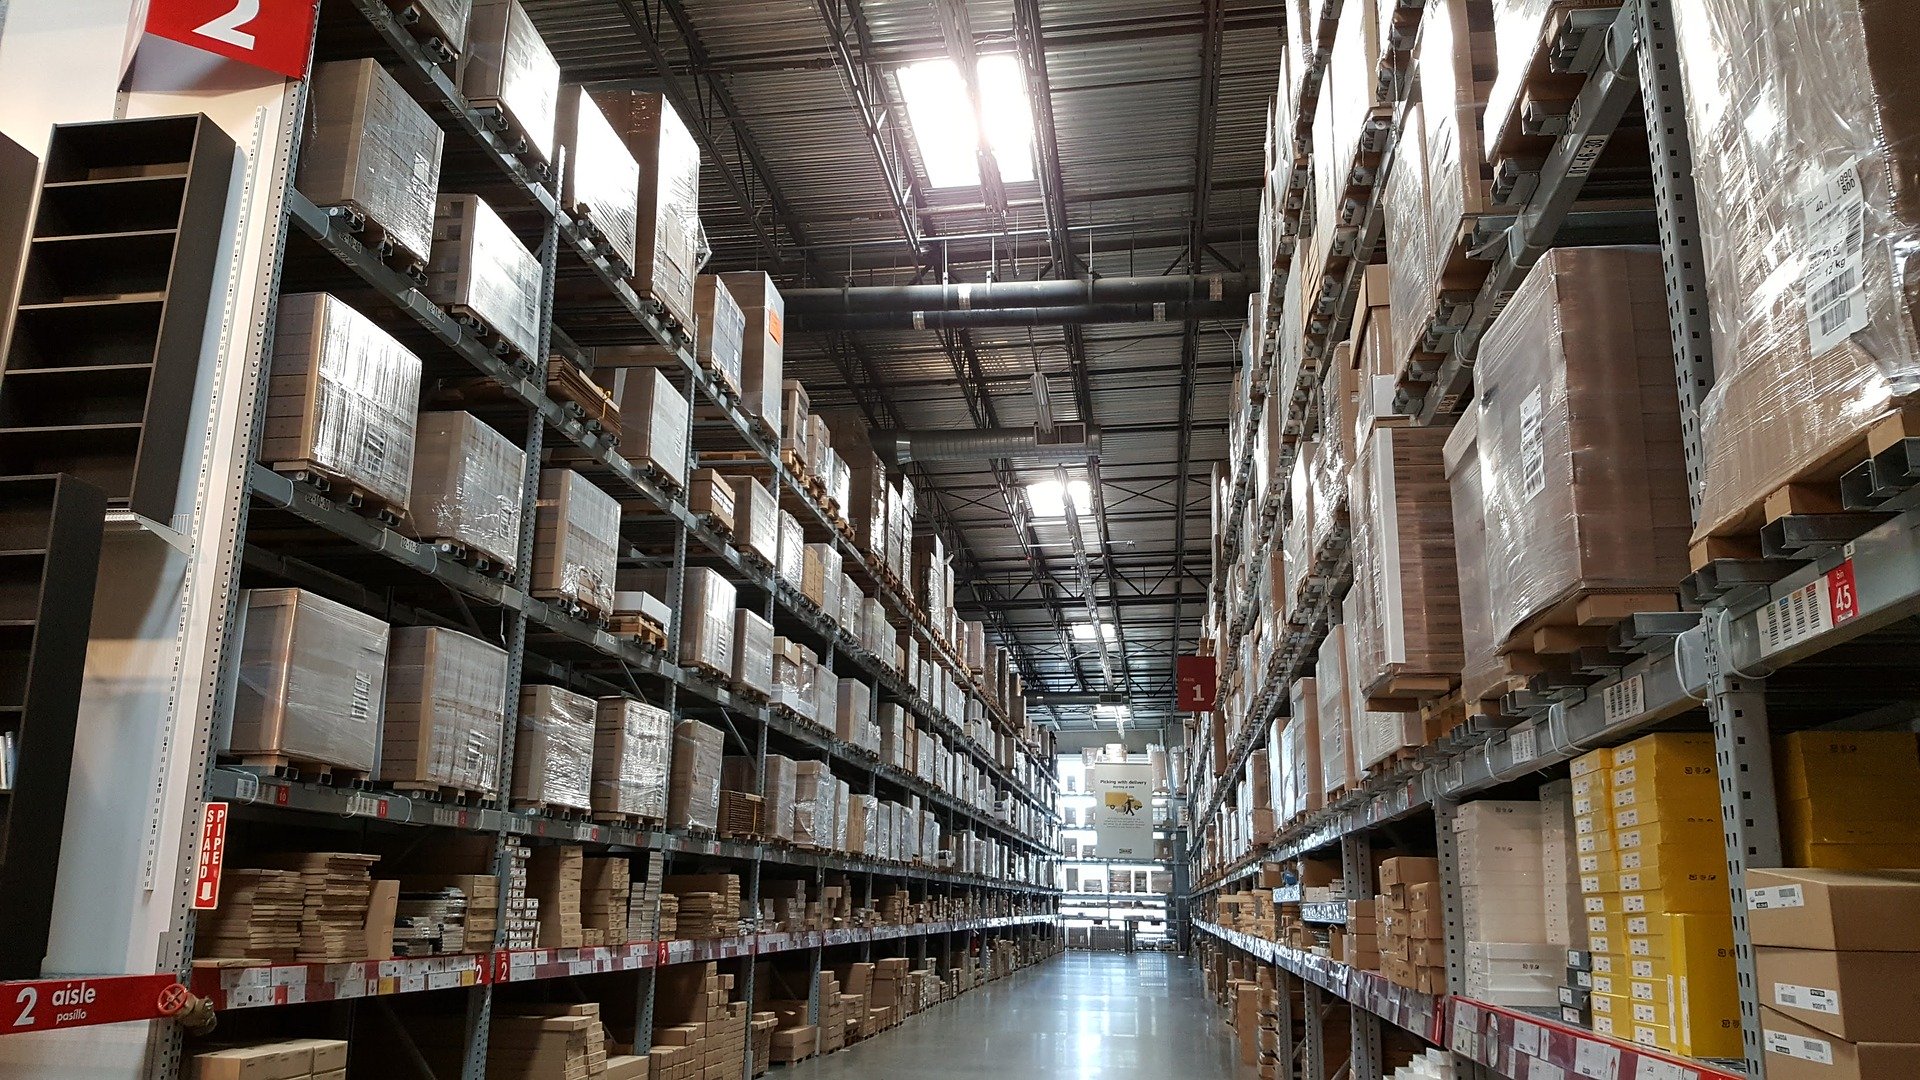 Boxes on shelves in a warehouse